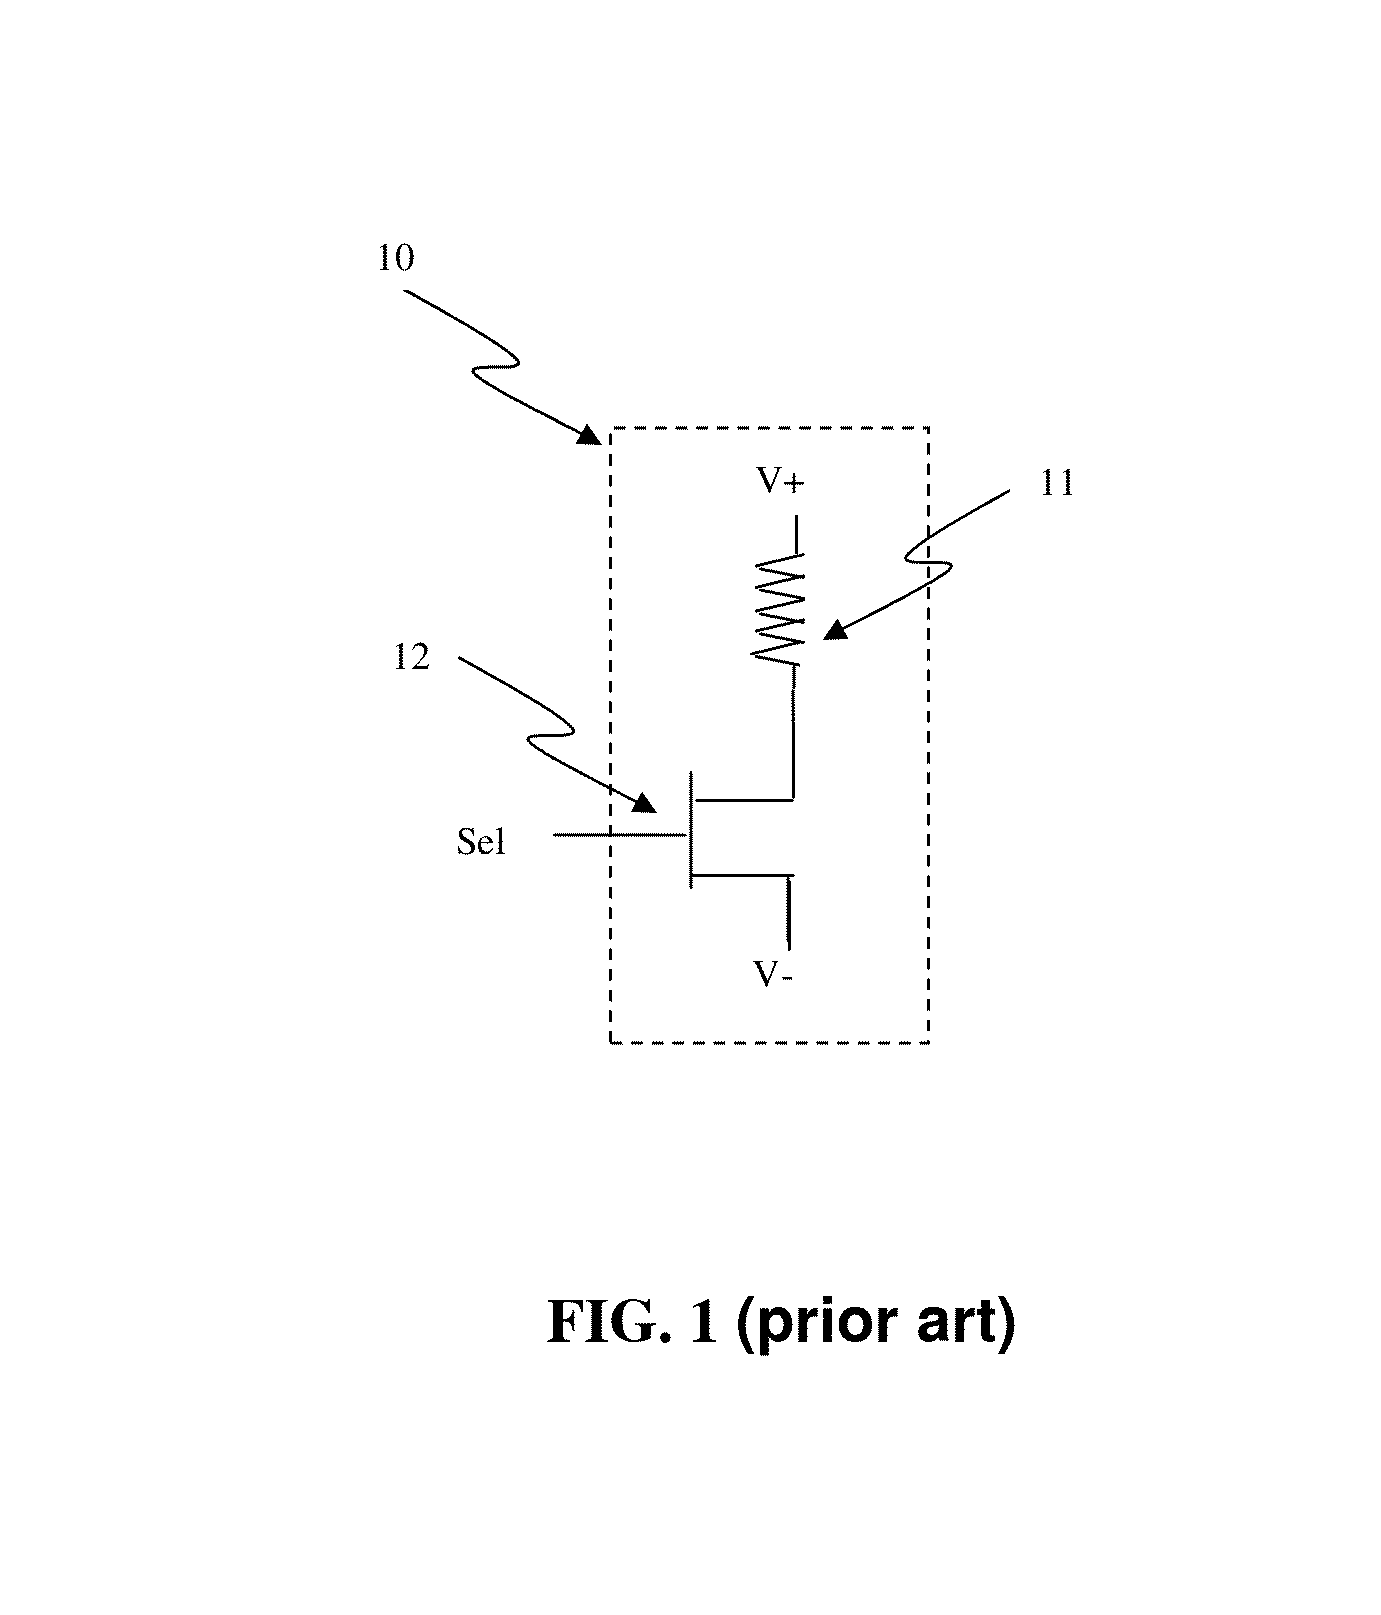 Circuit and System of Using Junction Diode as Porgram Selector for One-Time Programmable Devices with Heat Sink